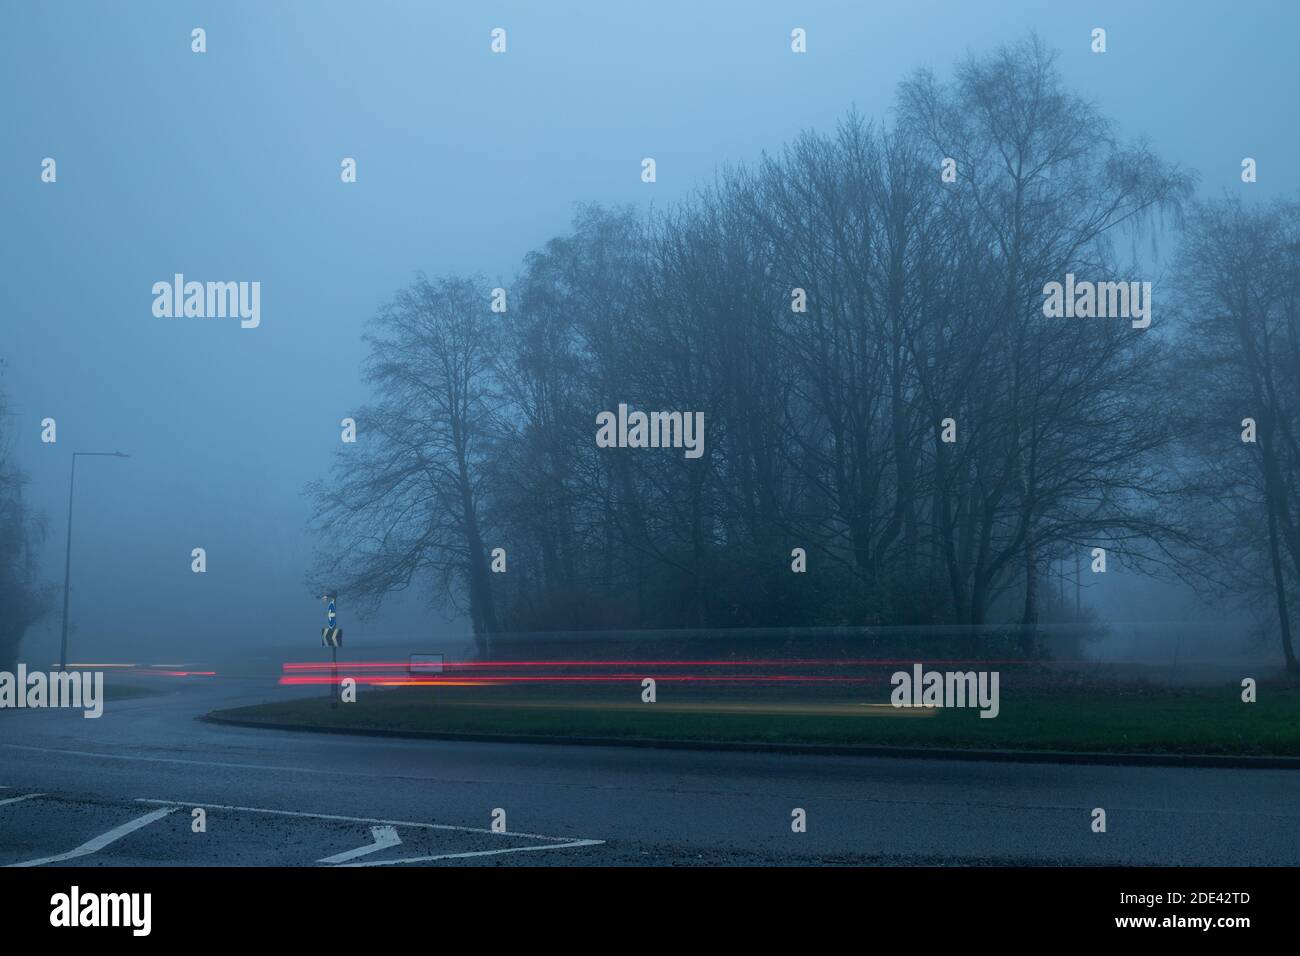 Heath Hill Roundabout, Dawley in Telford, United Kingdom. 28th November, 2020 Dangerous driving conditions affected by heavy fog in Shropshire  Credit: Eddie Cloud/Alamy Live News. Stock Photo